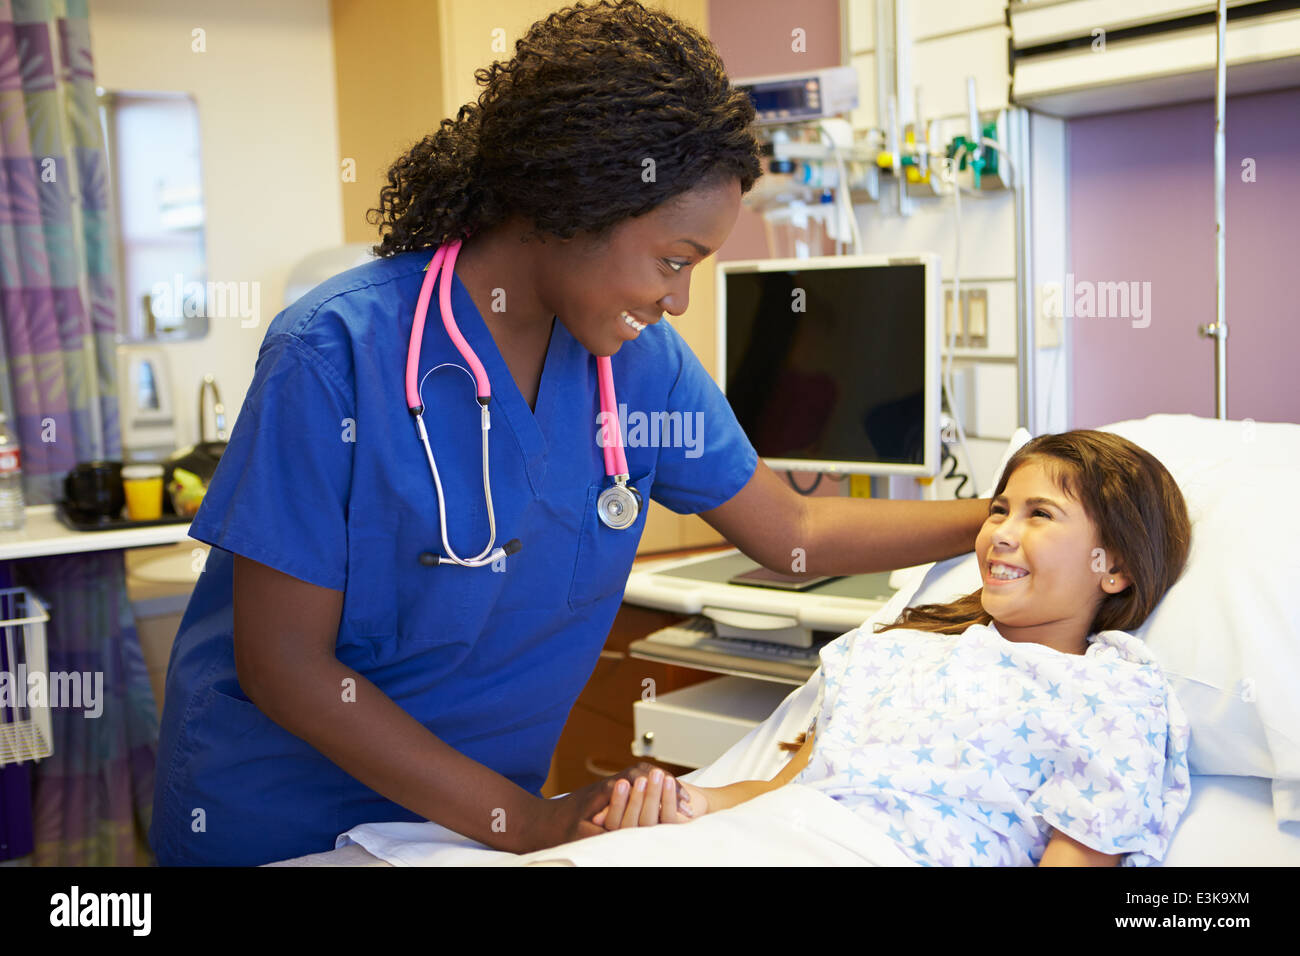 Young Girl Talking To Female Nurse In Hospital Room Stock Photo